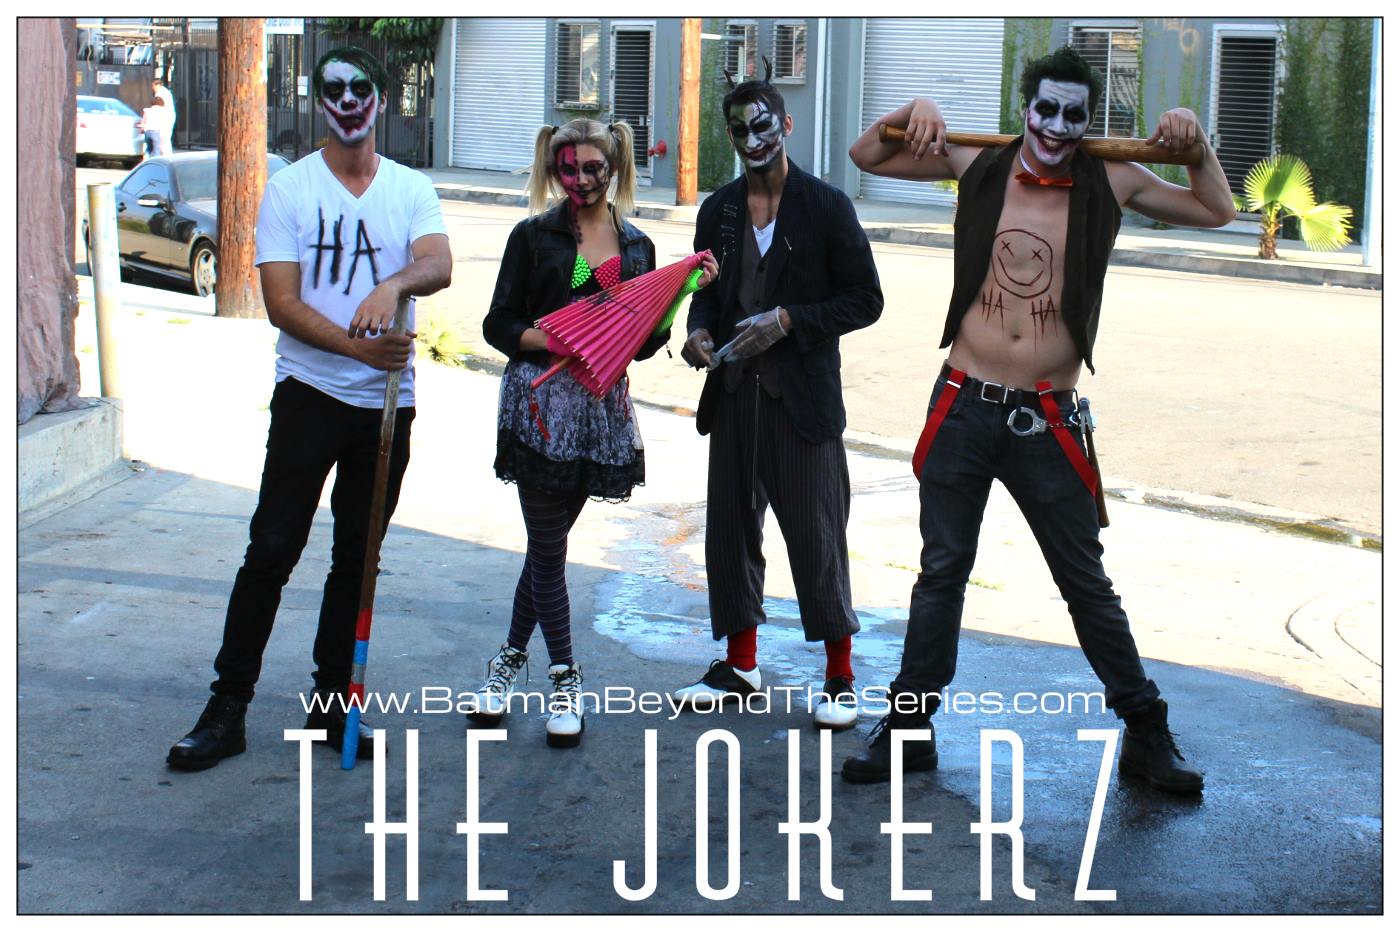 Pave Mara (middle), Kaye L. Morris (middle), Josh Madson (right) and Andrés Segovia (left) in full Jokerz costume and make-up on set of Batman Beyond The Series